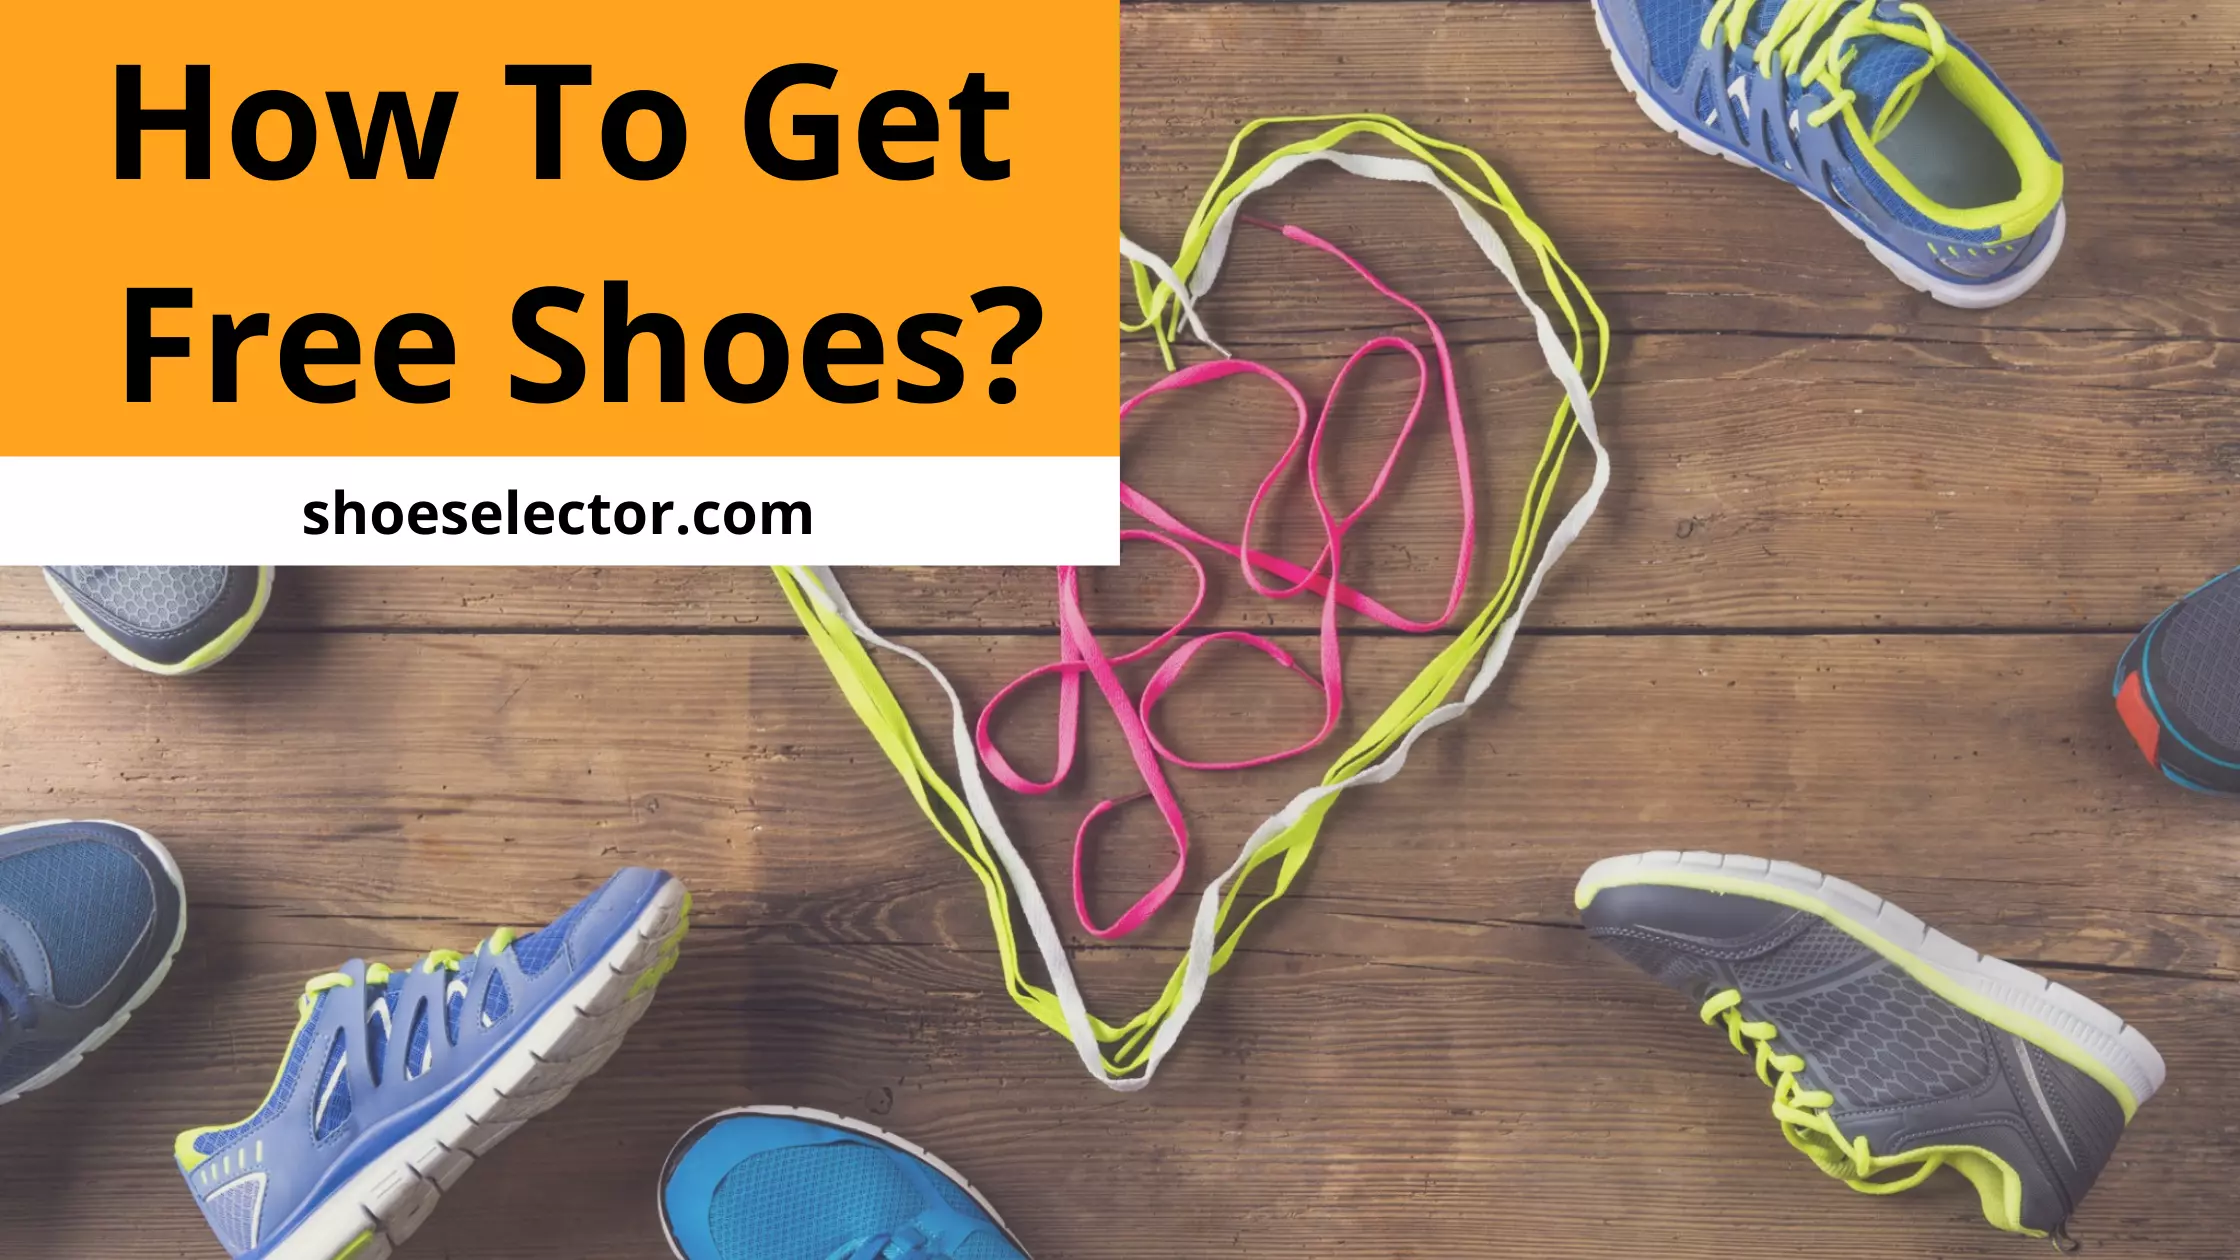 How To Get Free Shoes? - With Tips and Tricks